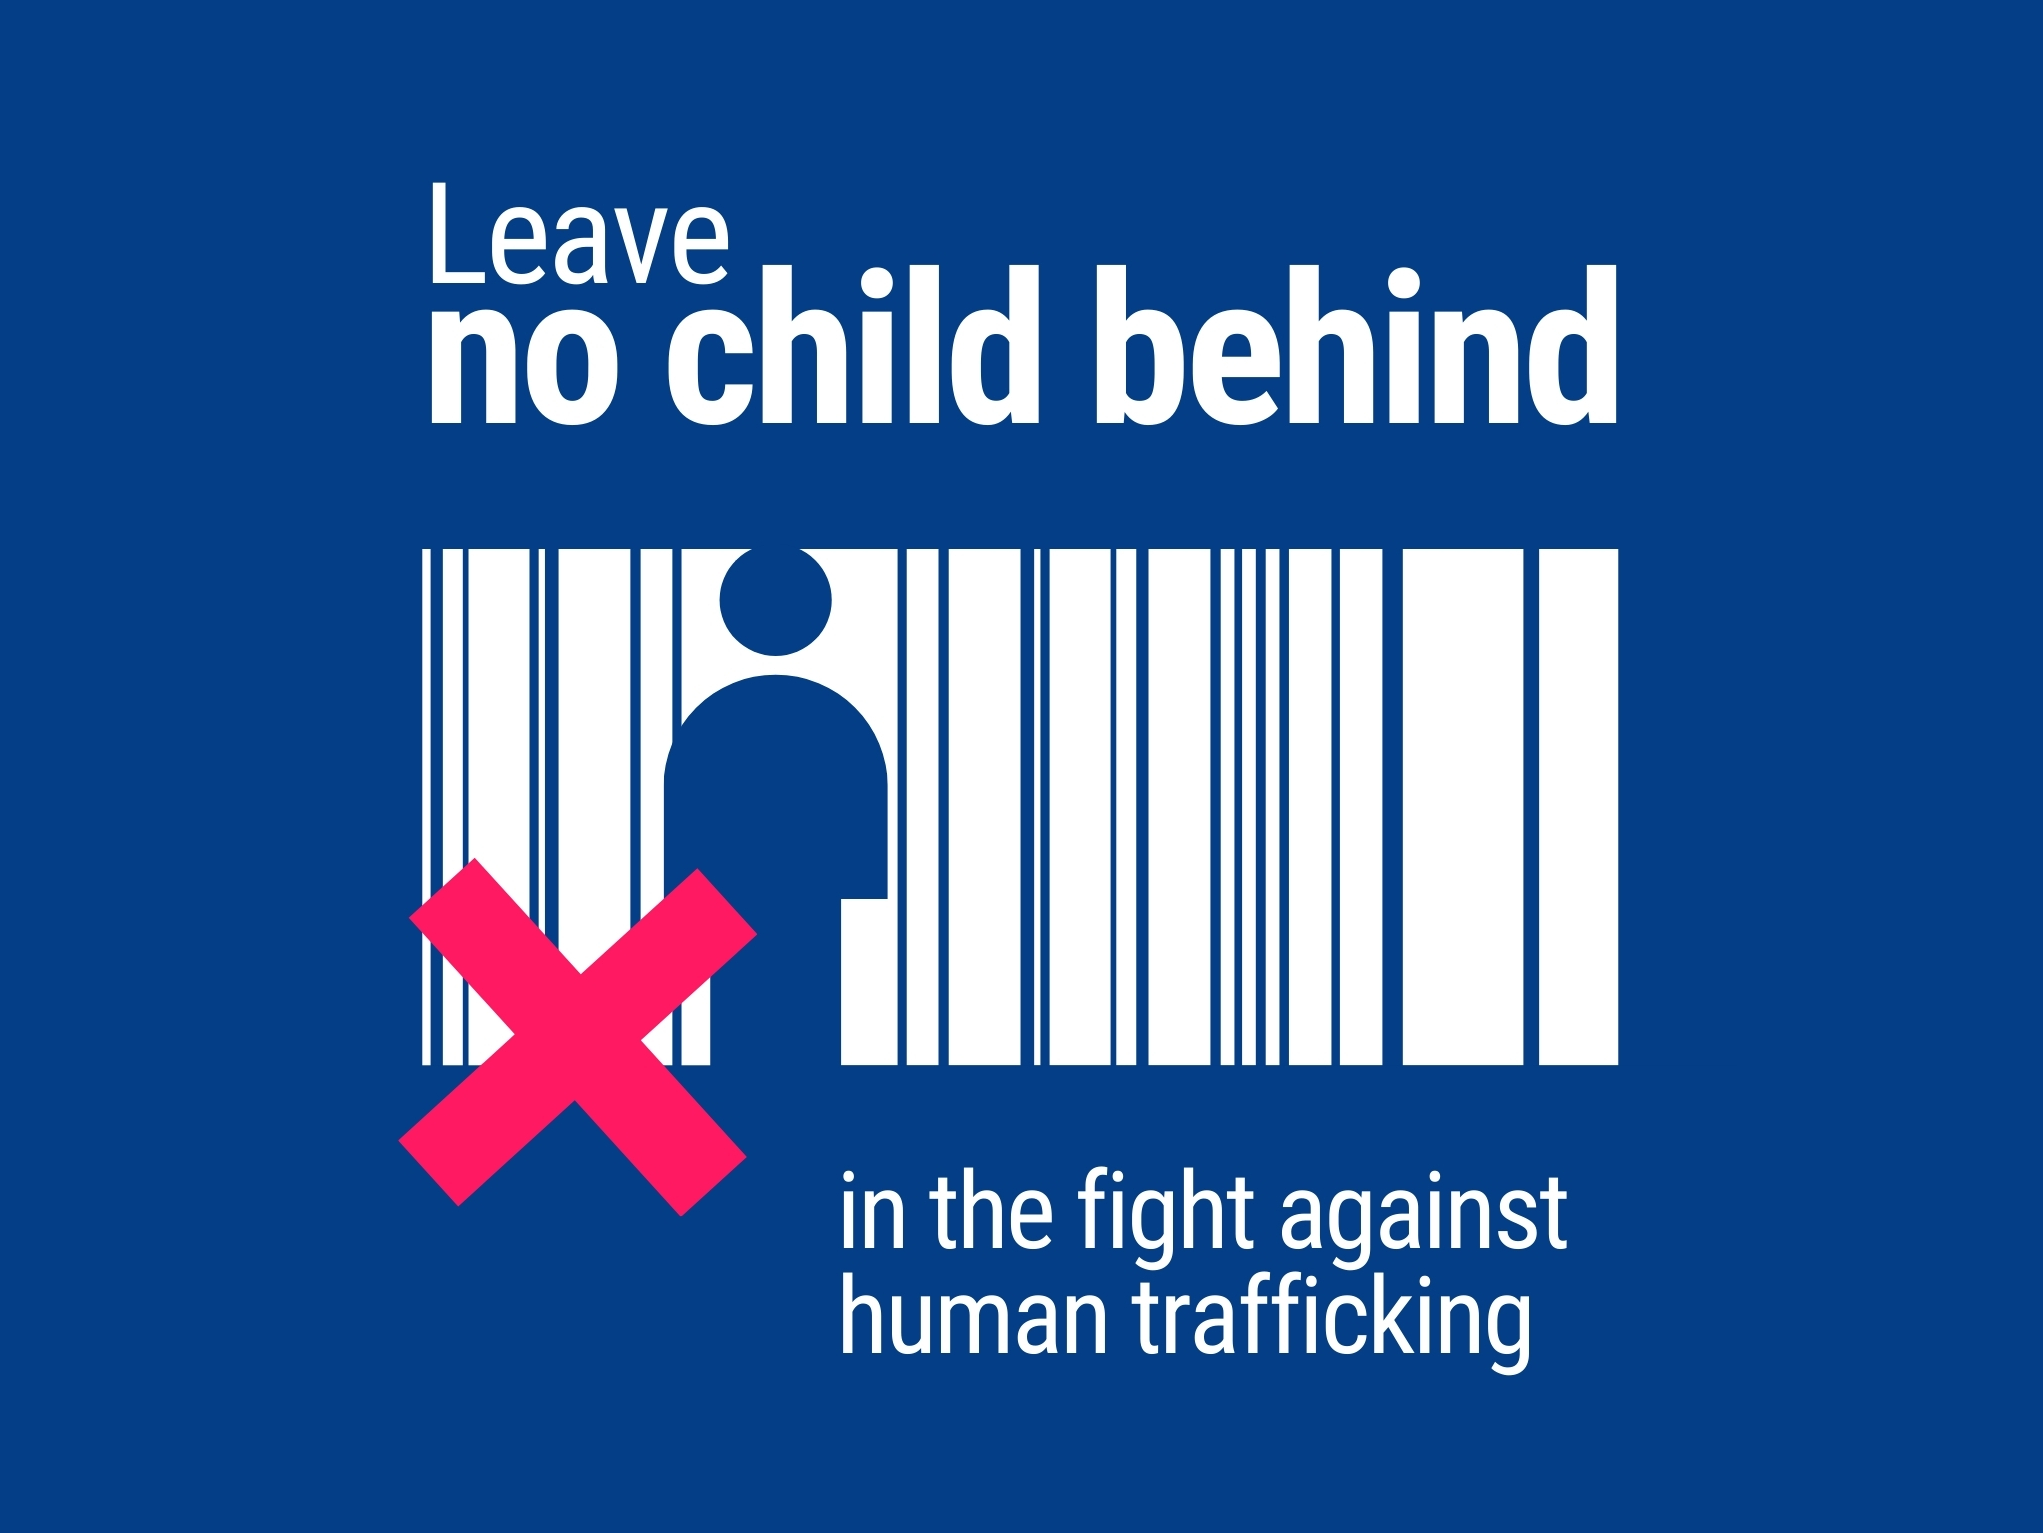 A graphic on a blue background features the text "Leave no child behind in the fight against human trafficking." The words are positioned above a barcode with a red 'X' mark intersecting a childlike silhouette within the barcode.